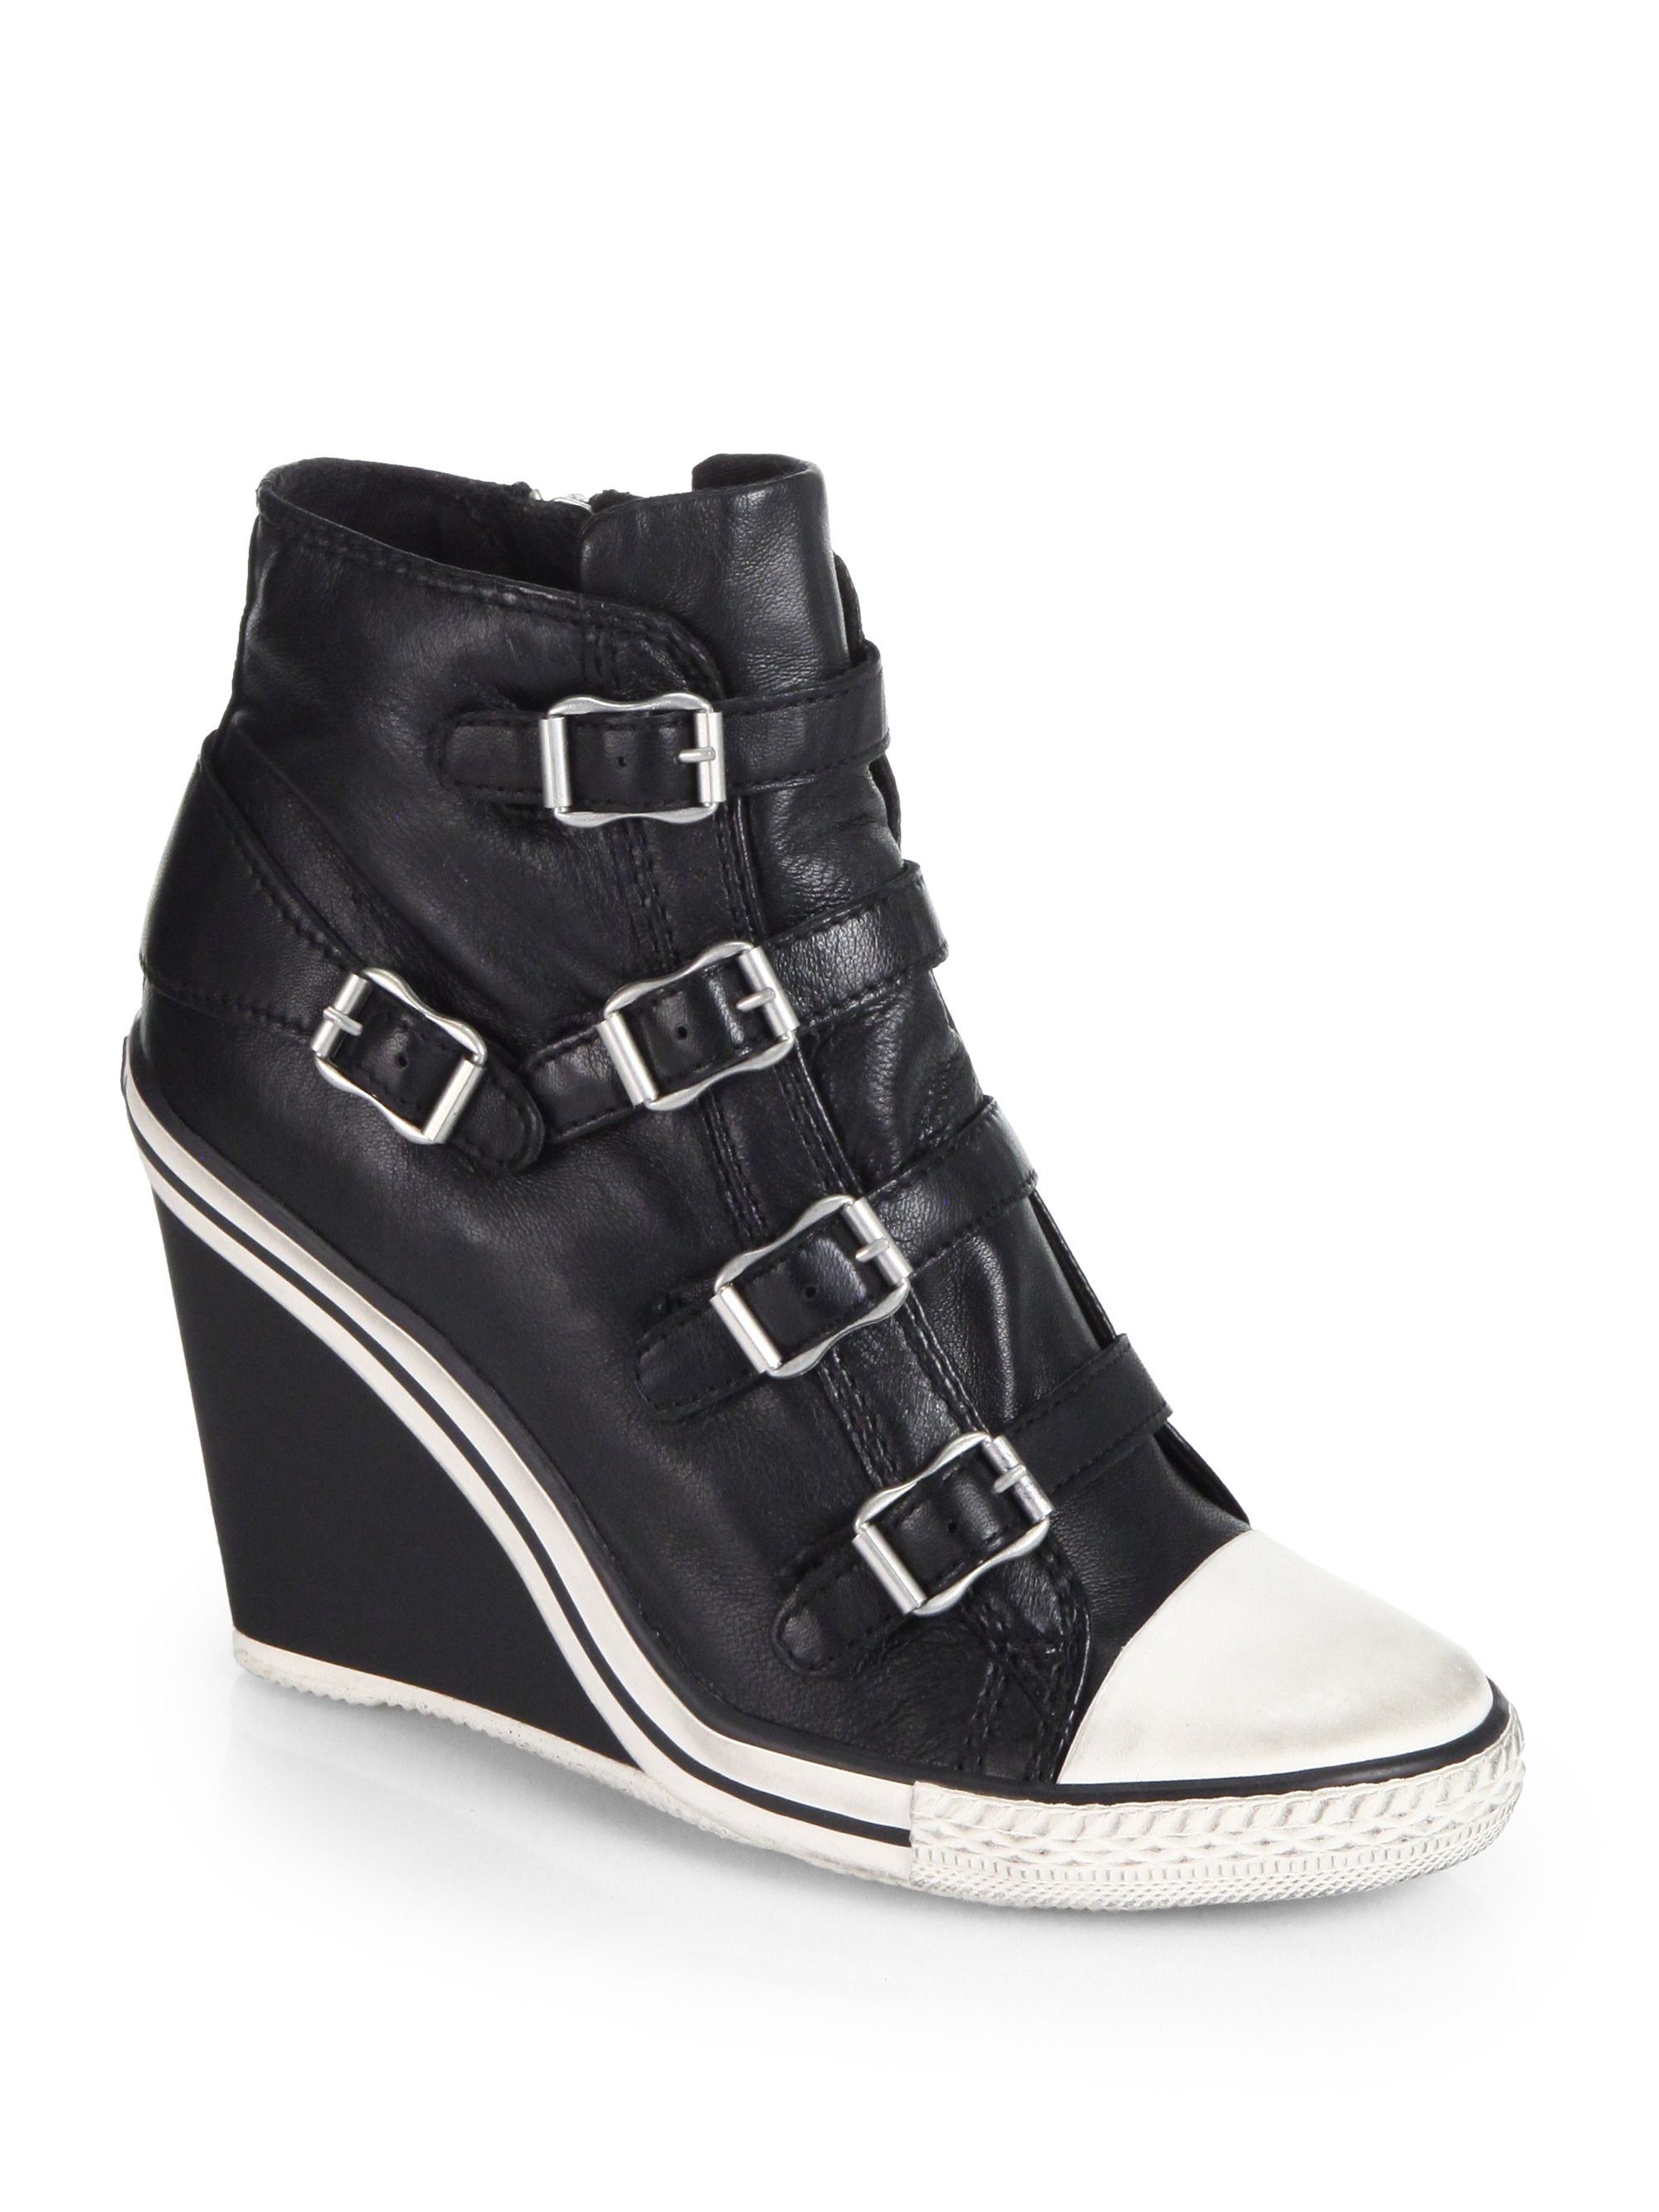 Ash Thelma Leather Wedge Sneakers in Black | Lyst